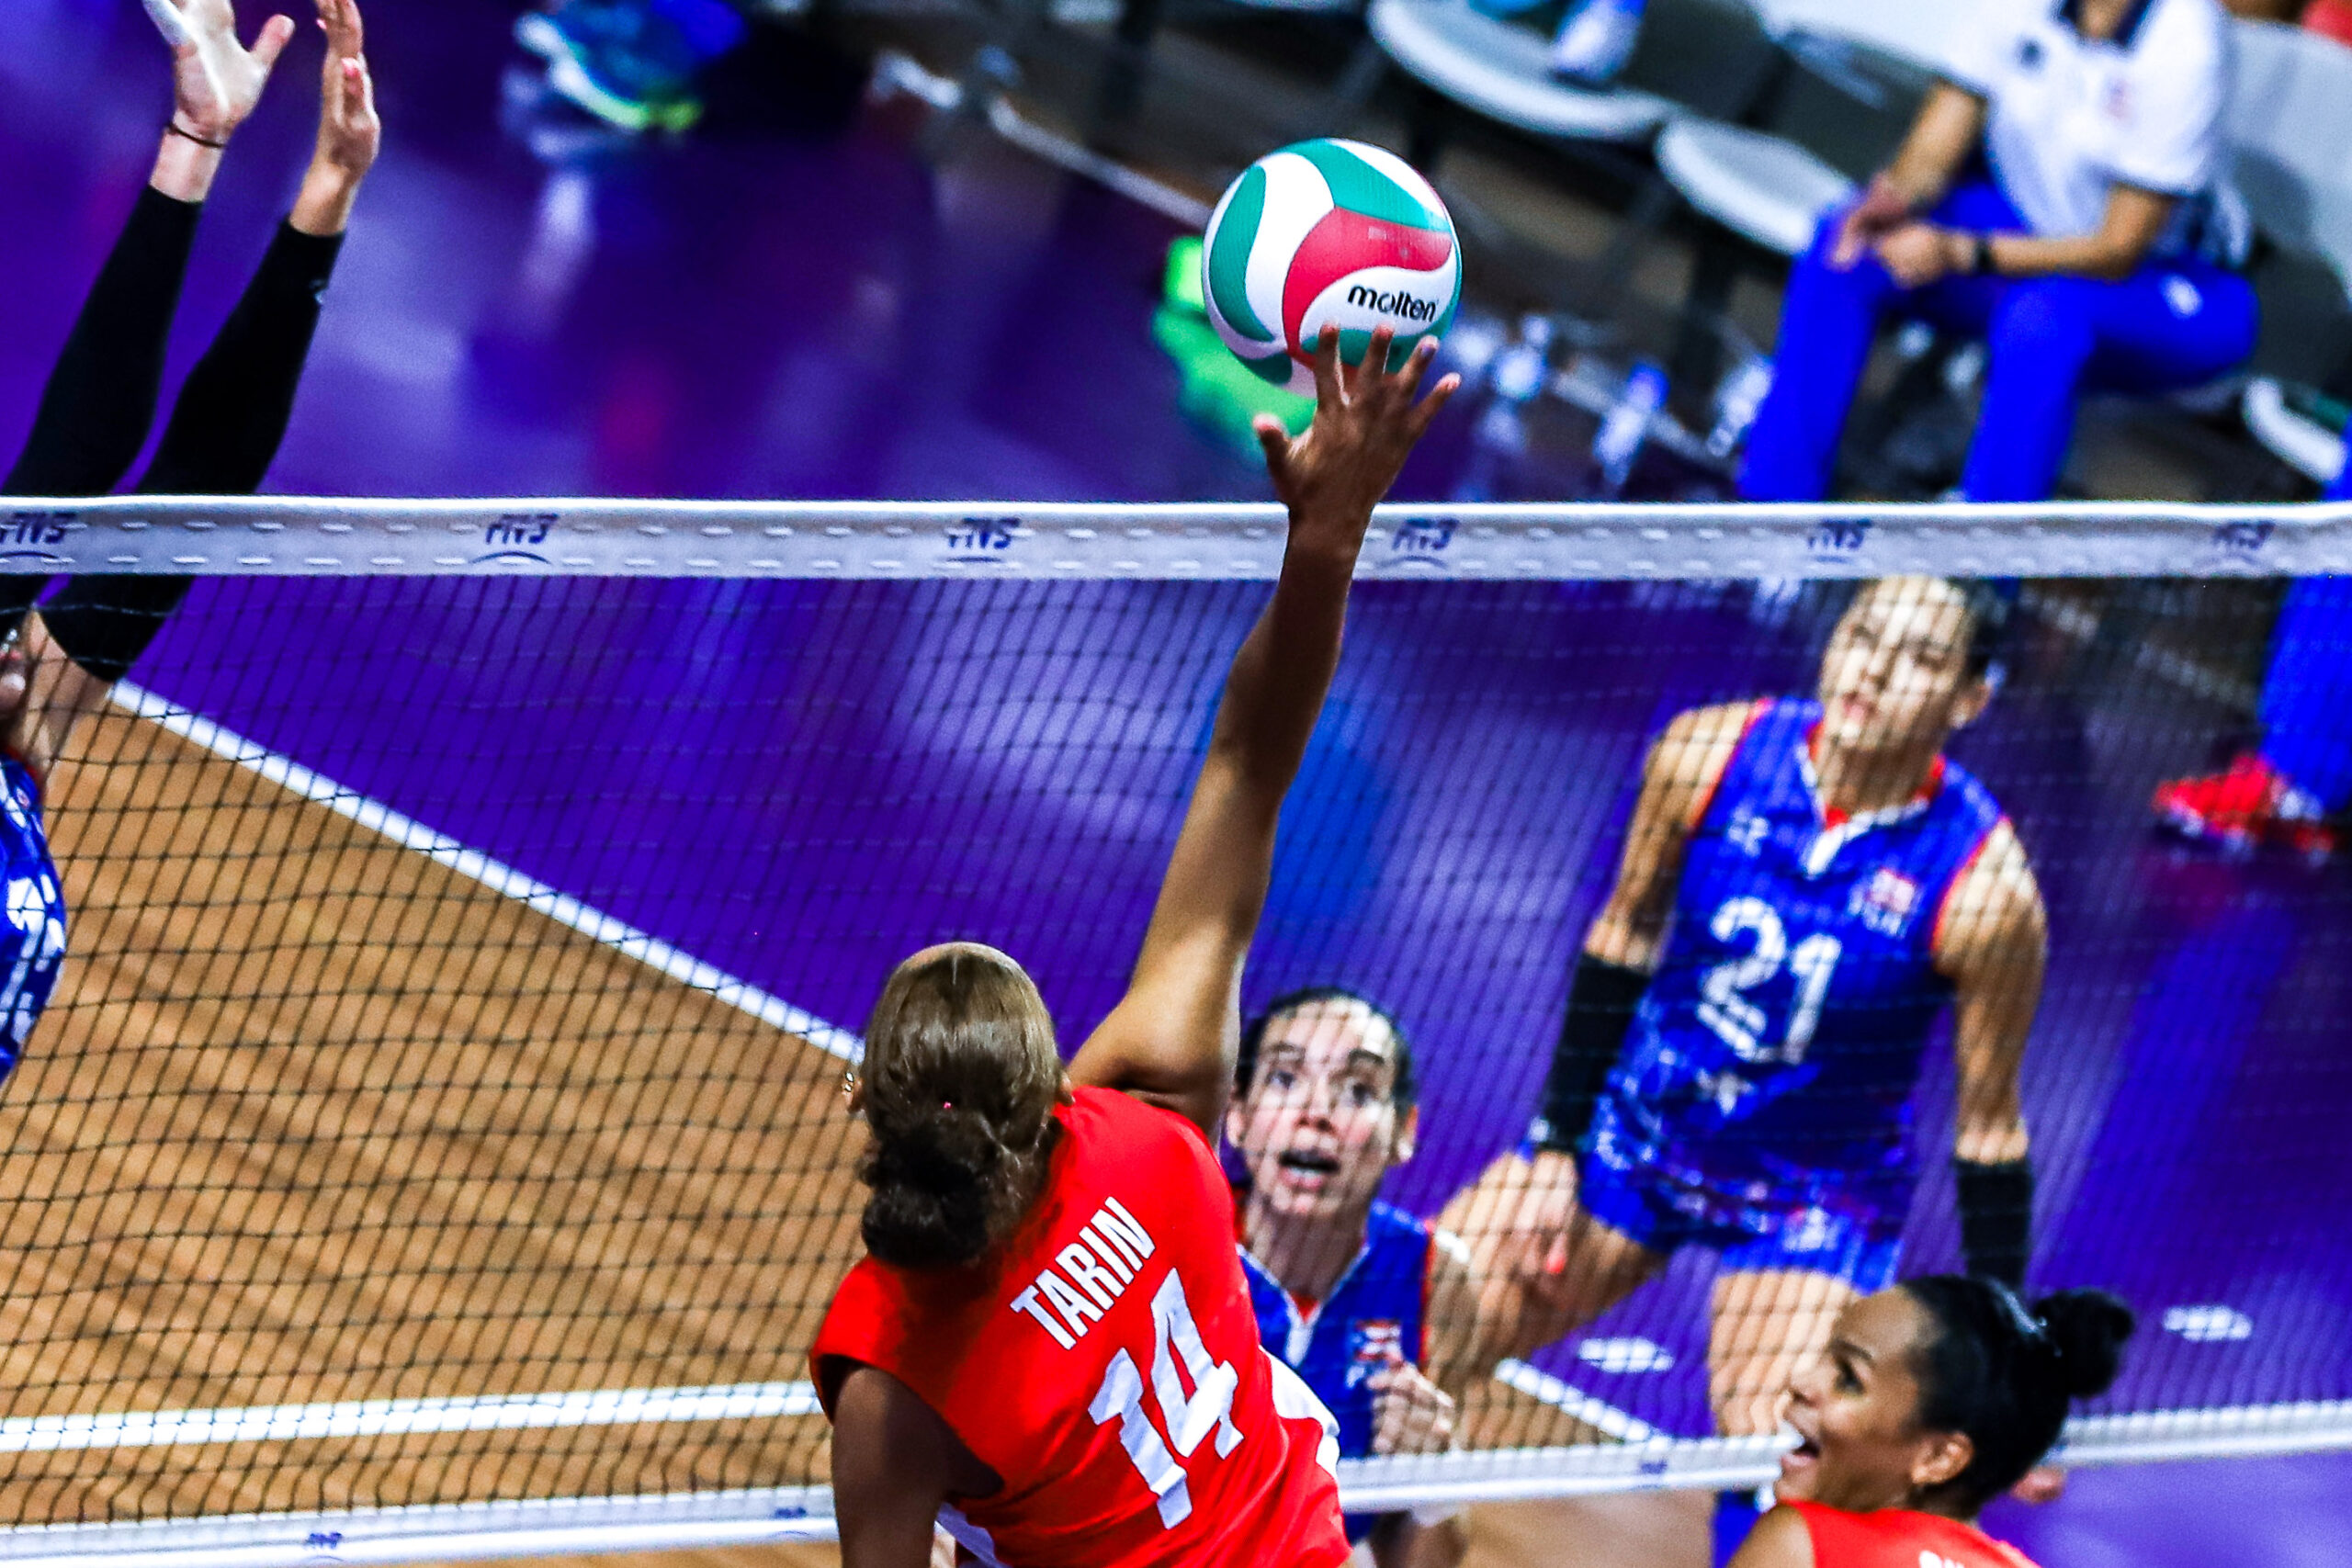 Cuba beat Puerto Rico for fifth place